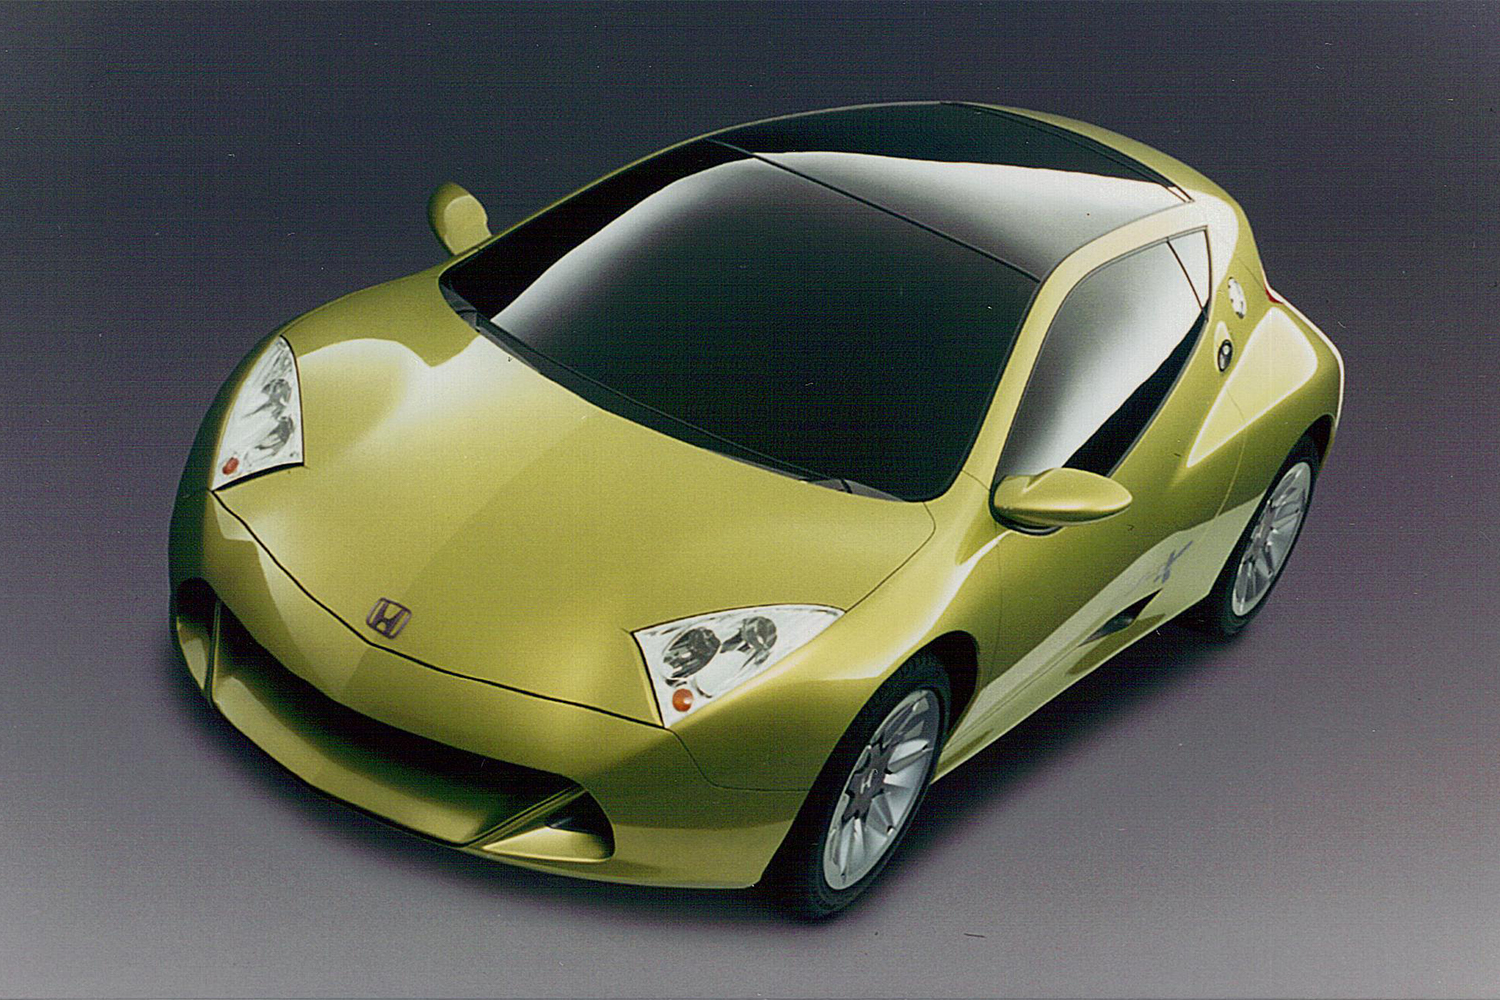 The J-VX hybrid sports car prototype, as presented by Honda at the Geneva Motor Show in 1998.